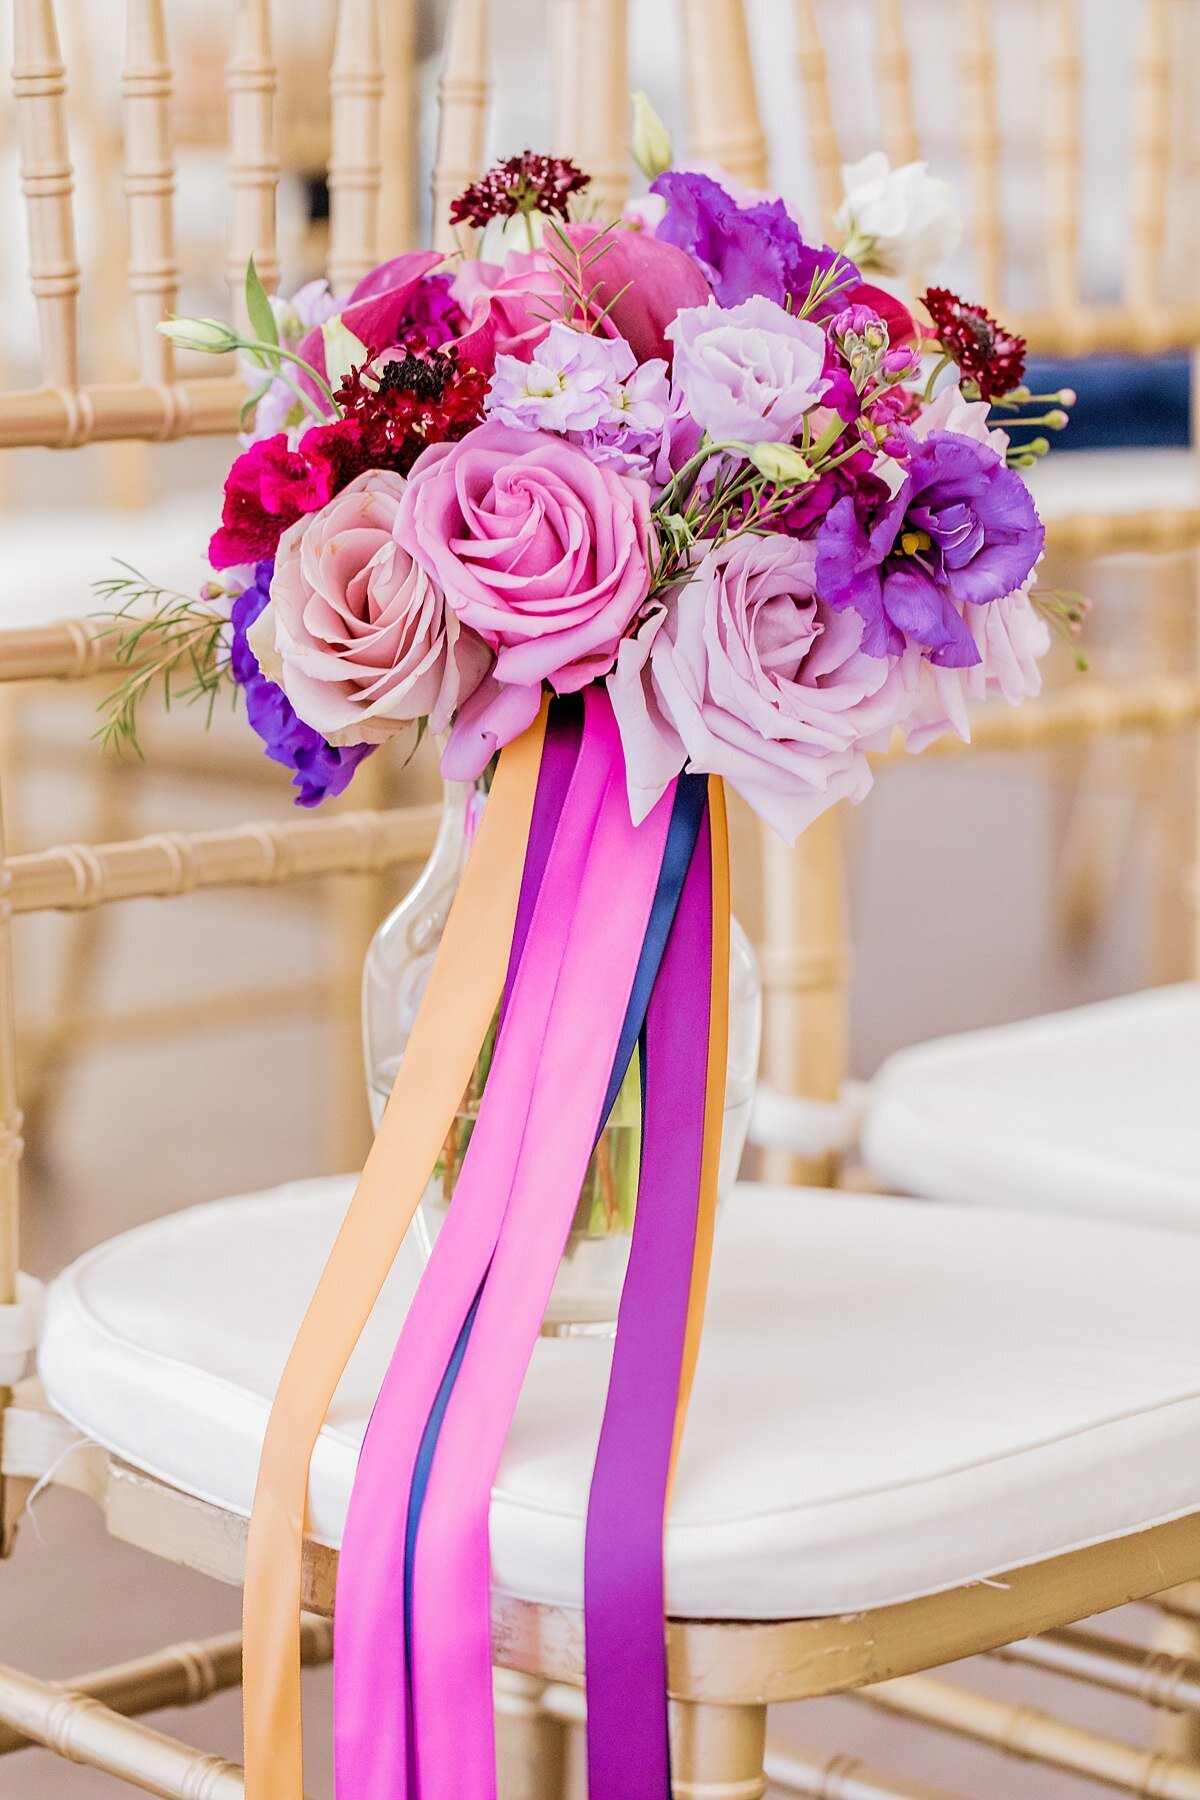 A bridal bouquet of peach roses, pink roses, magenta flowers, purple flowers and long streaming ribbons in pink, purple, navy and gold sit in a glass vase on a gold chivari chair with a white cushion.